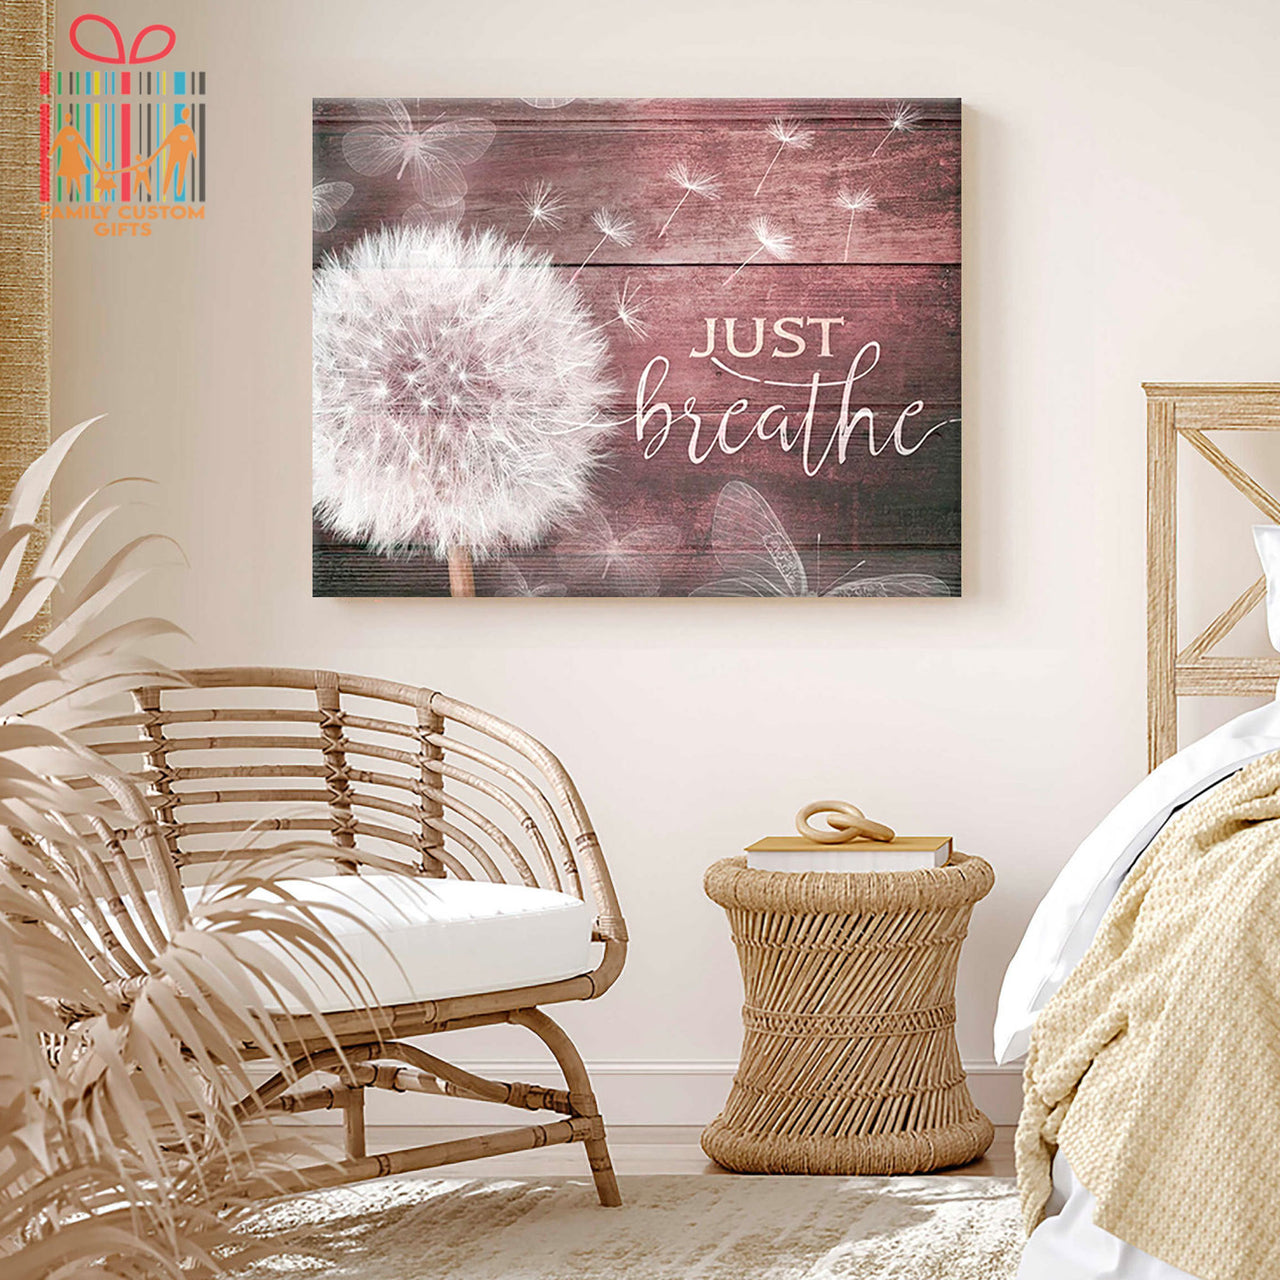 Custom Poster Prints Wall Art Just Breathe Personalized Gifts Wall Decor - Gift for Family